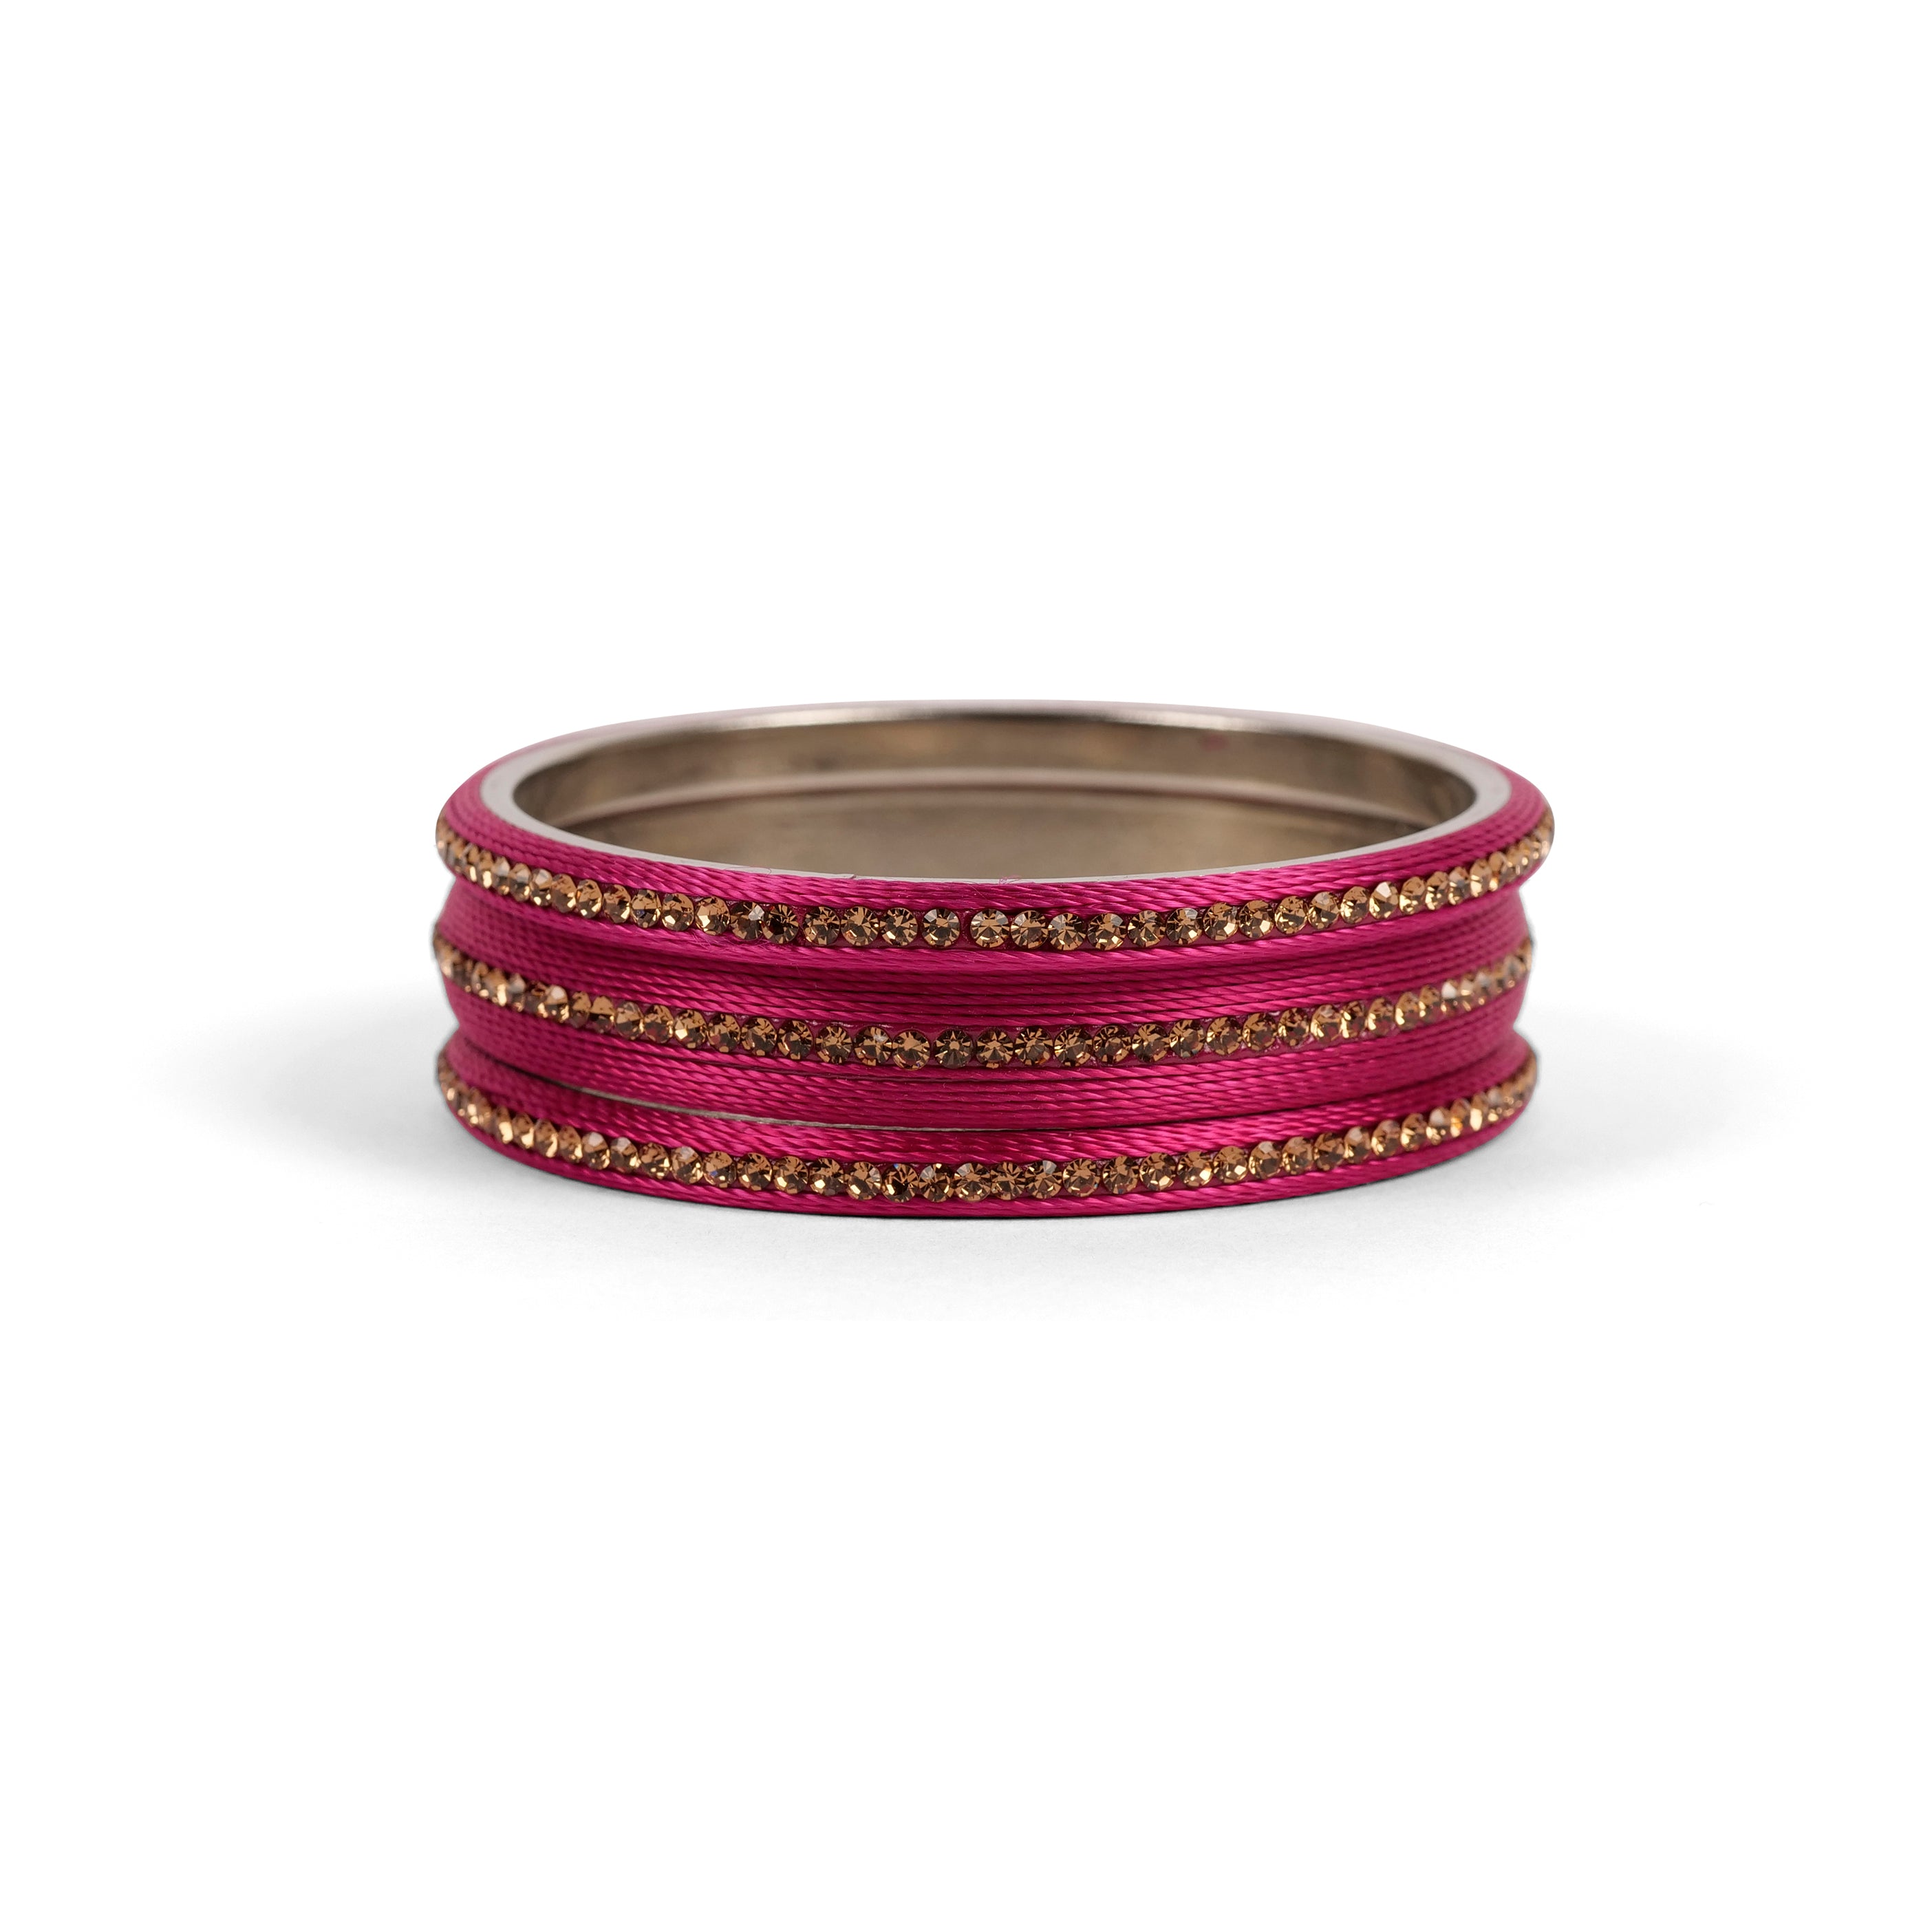 Set of 3 Thread Bangles in Pink